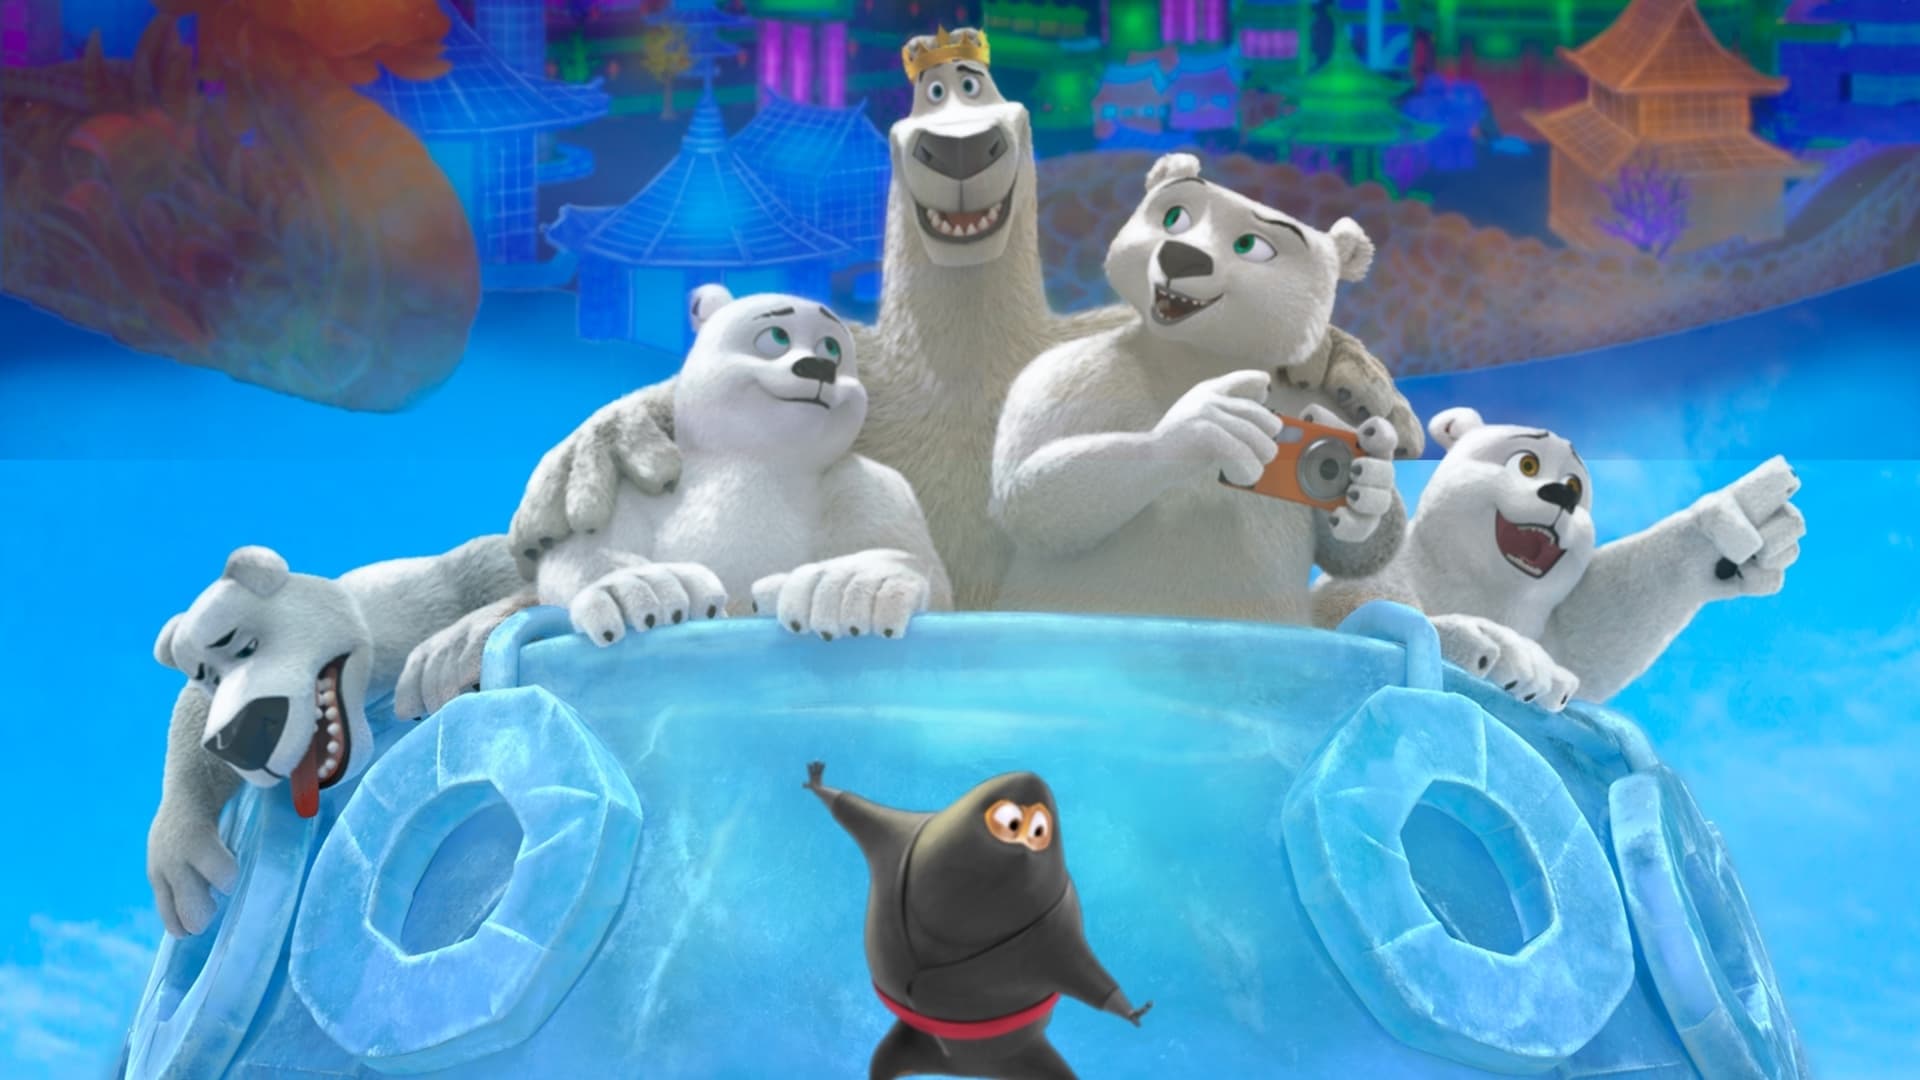 Norm of the North: Family Vacation (2020)